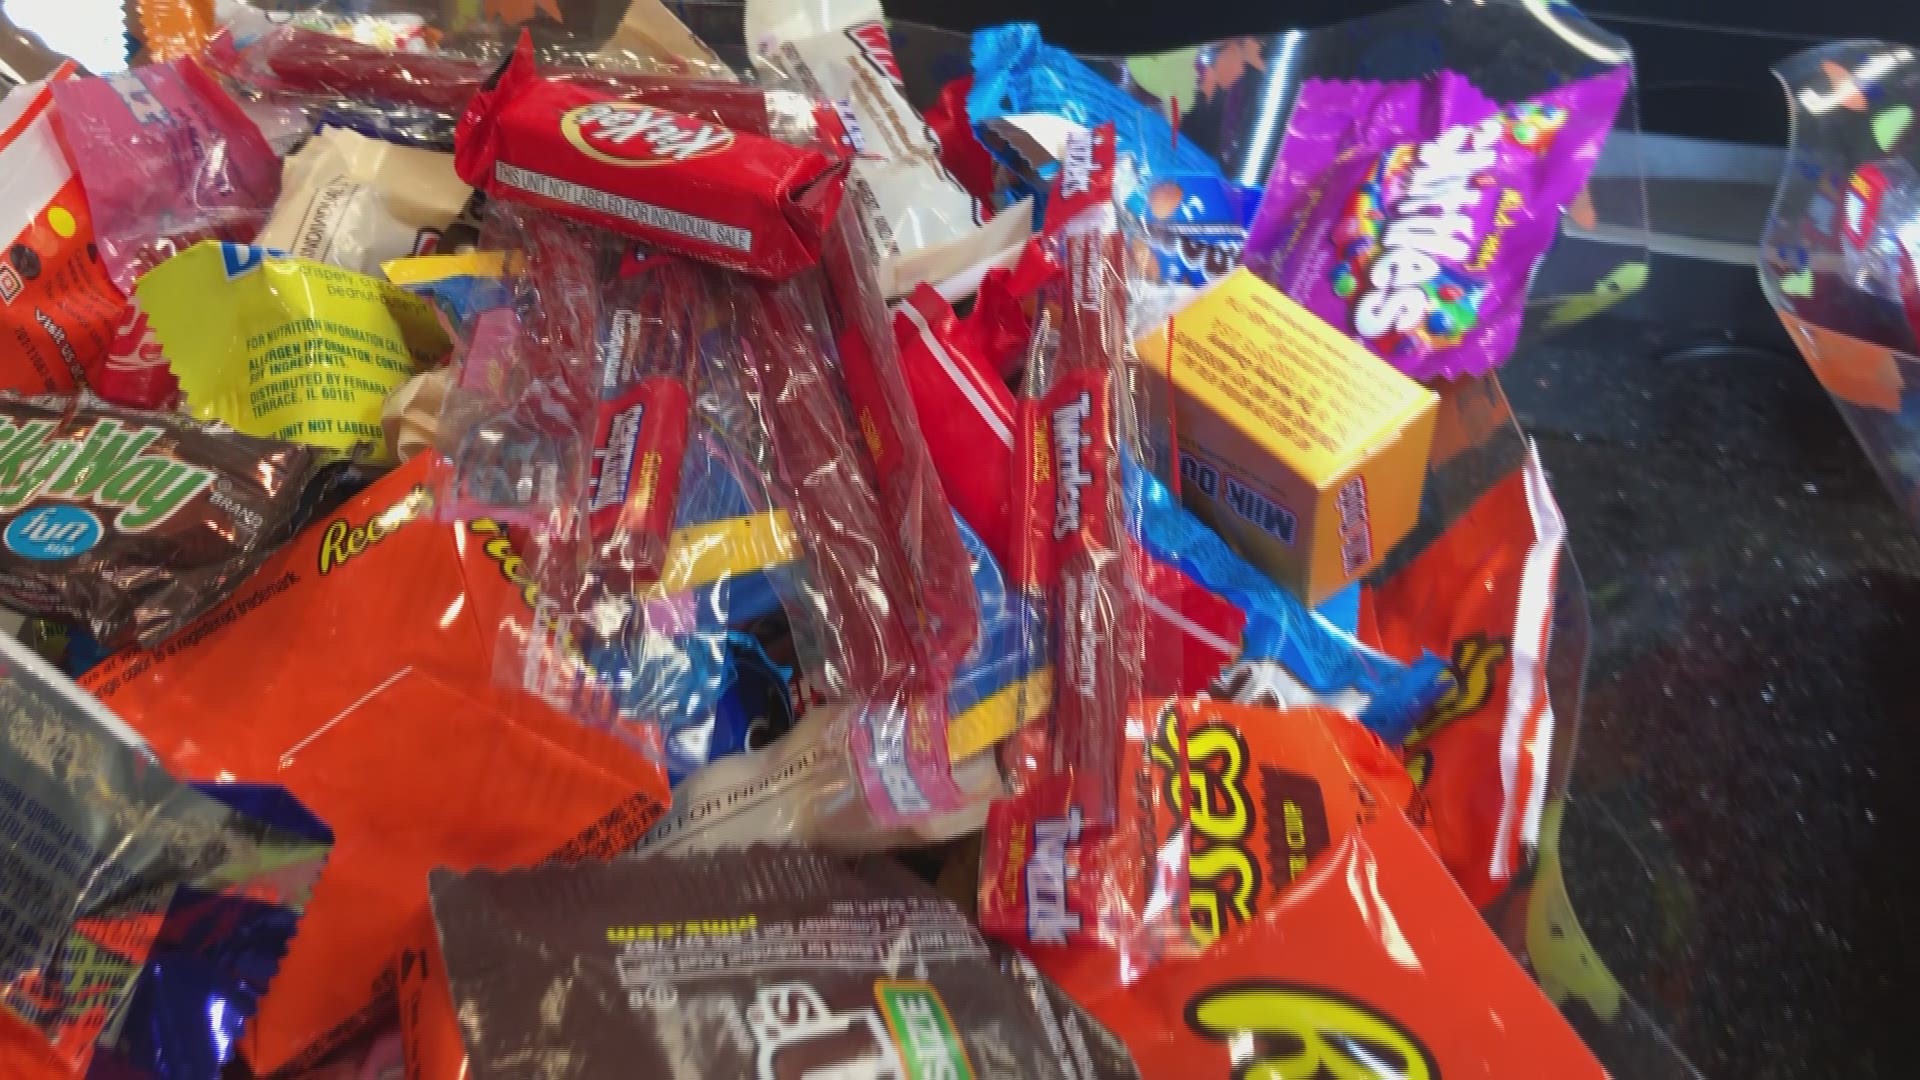 Video of Candy Buy Back